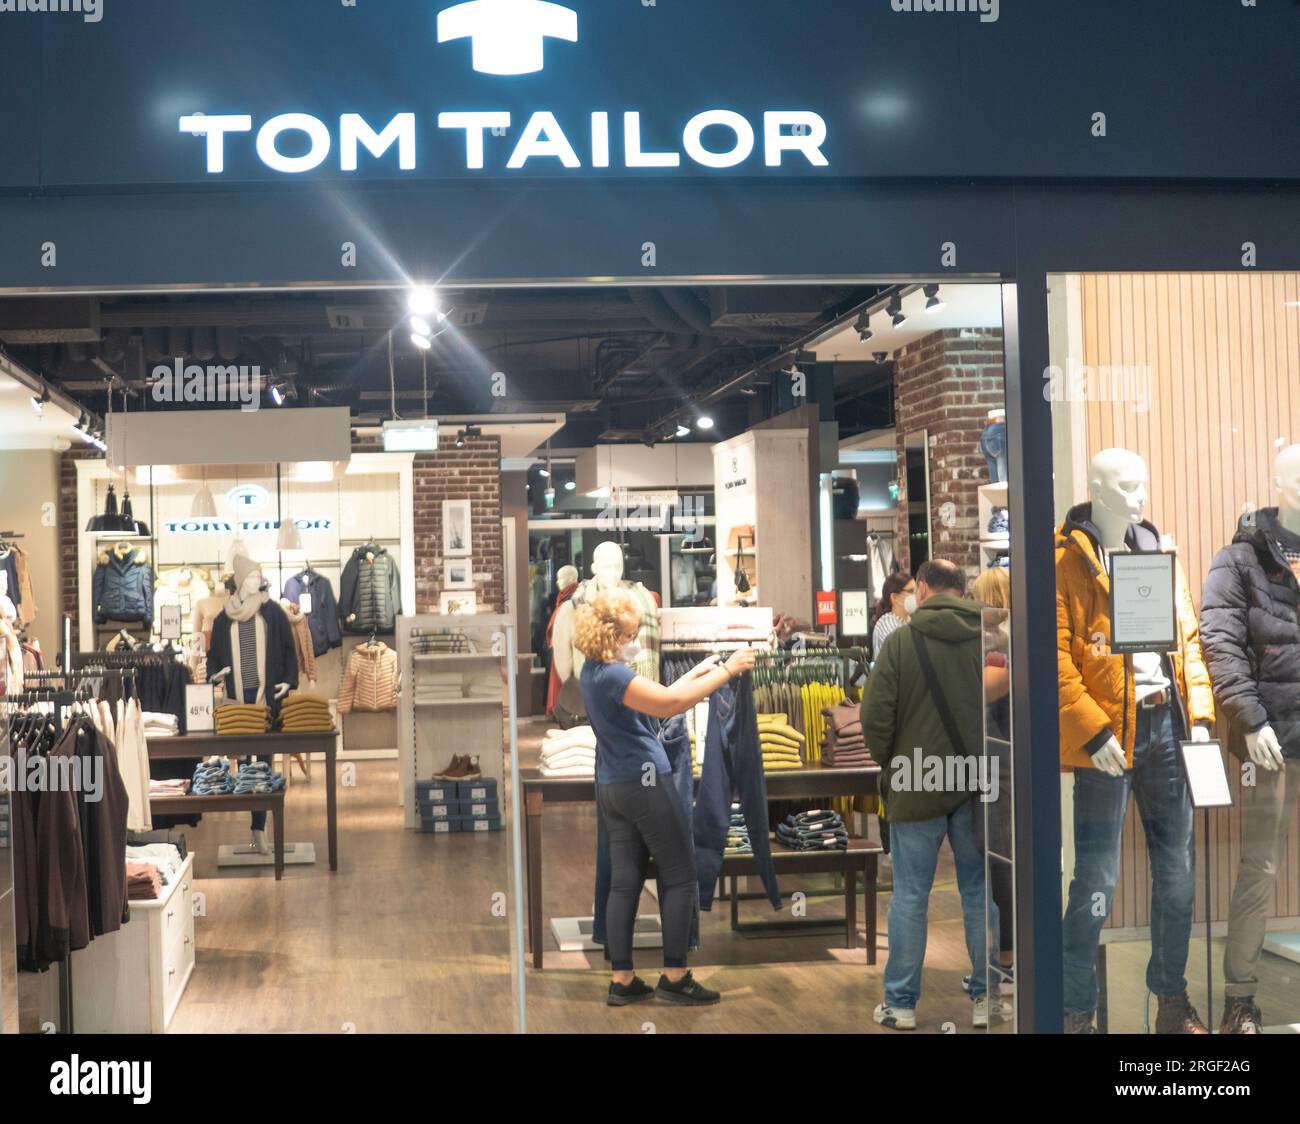 Tom tailor logo and photography stock - images Alamy hi-res